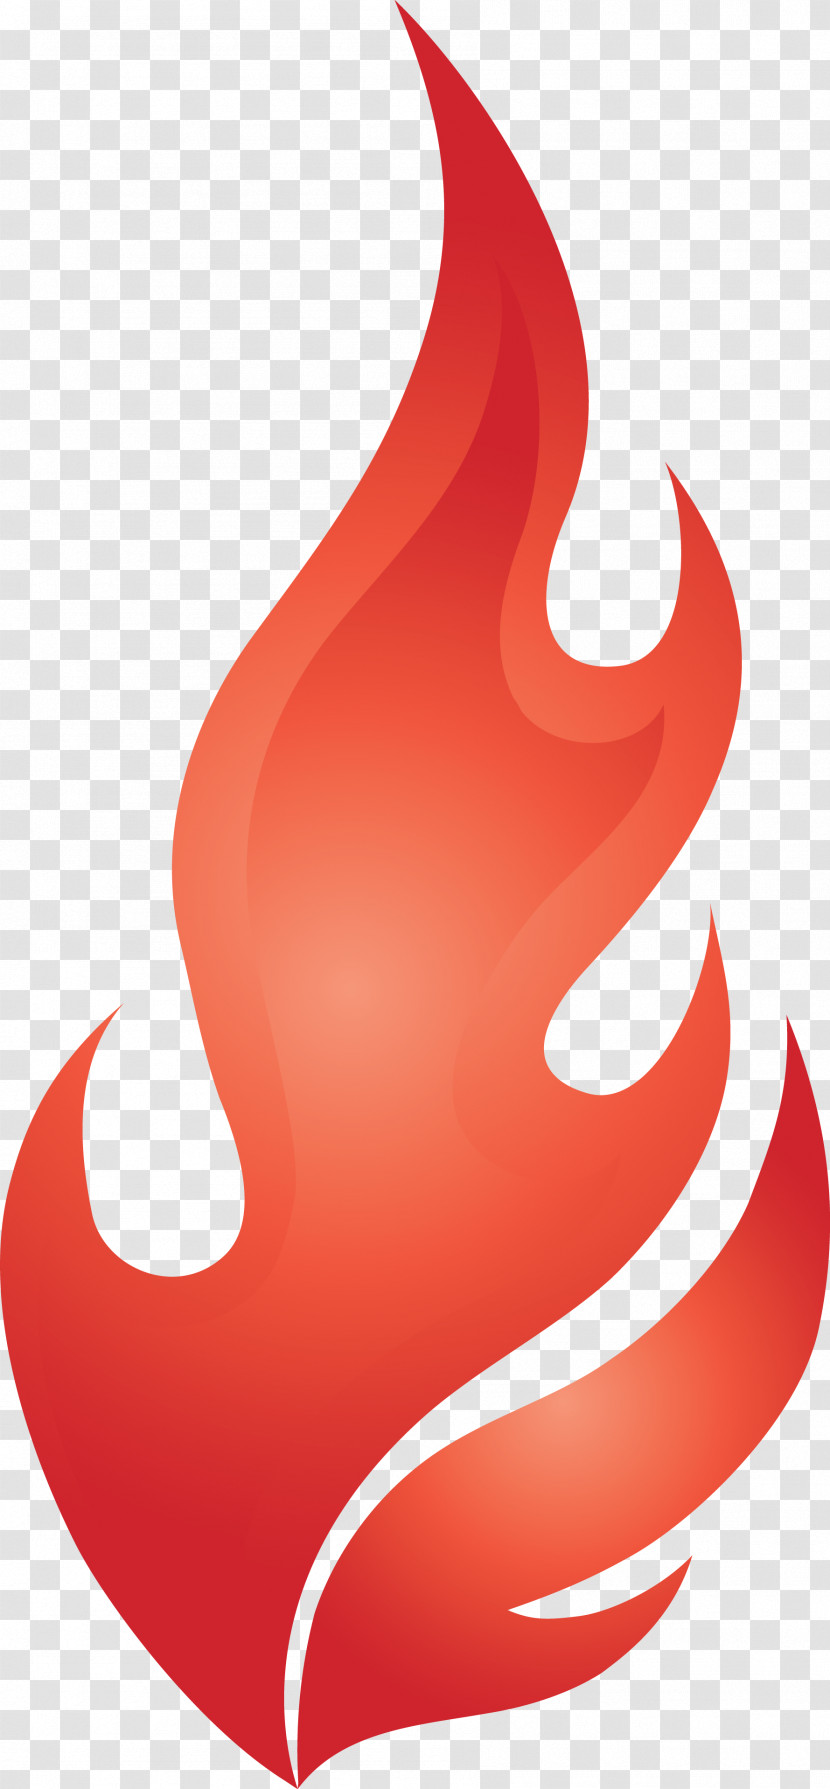 Fire Flame Transparent PNG